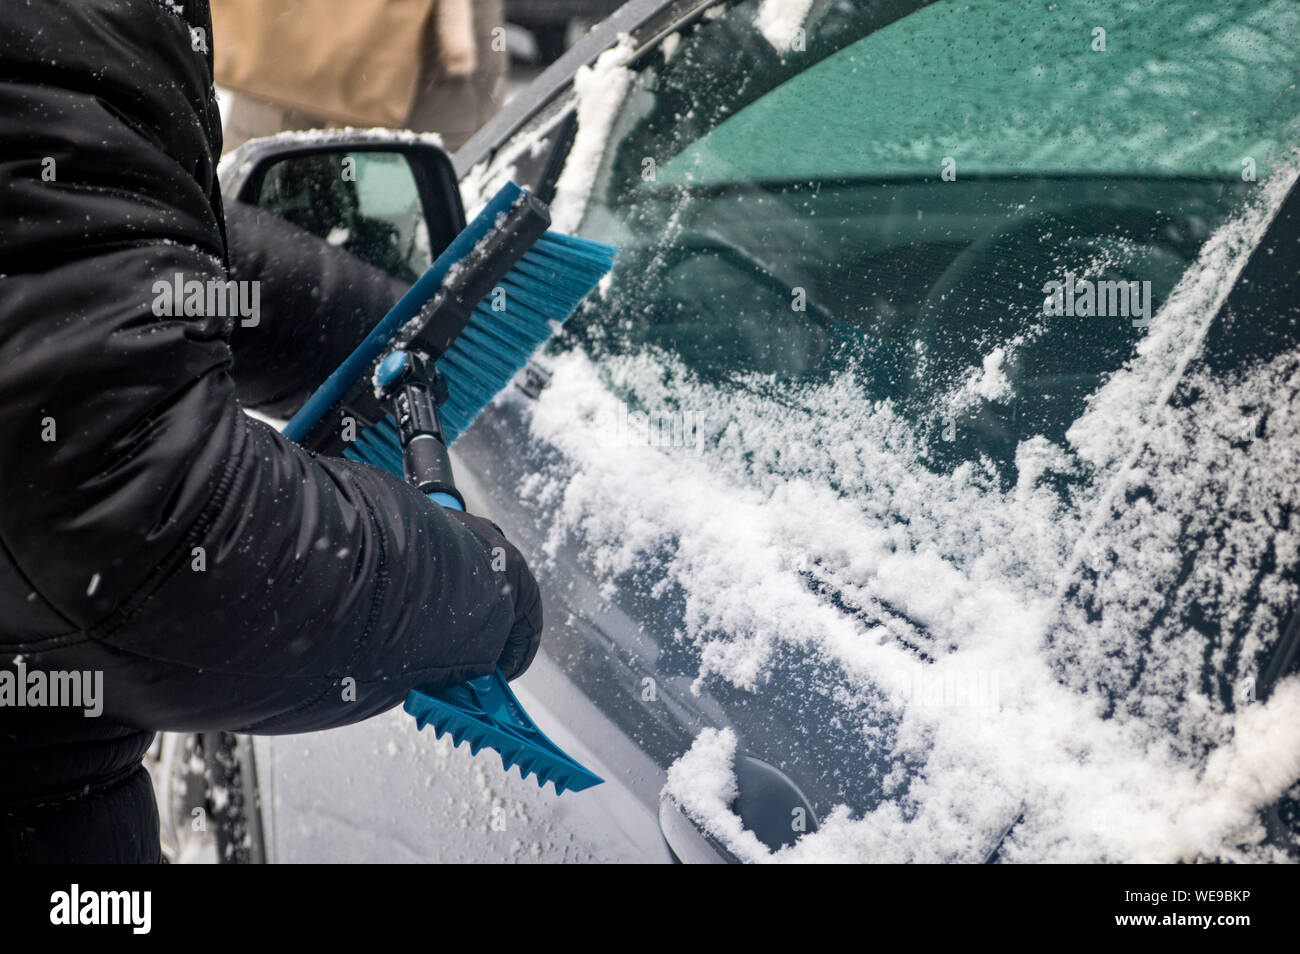 Person Removing Snow On Car Stock Photo